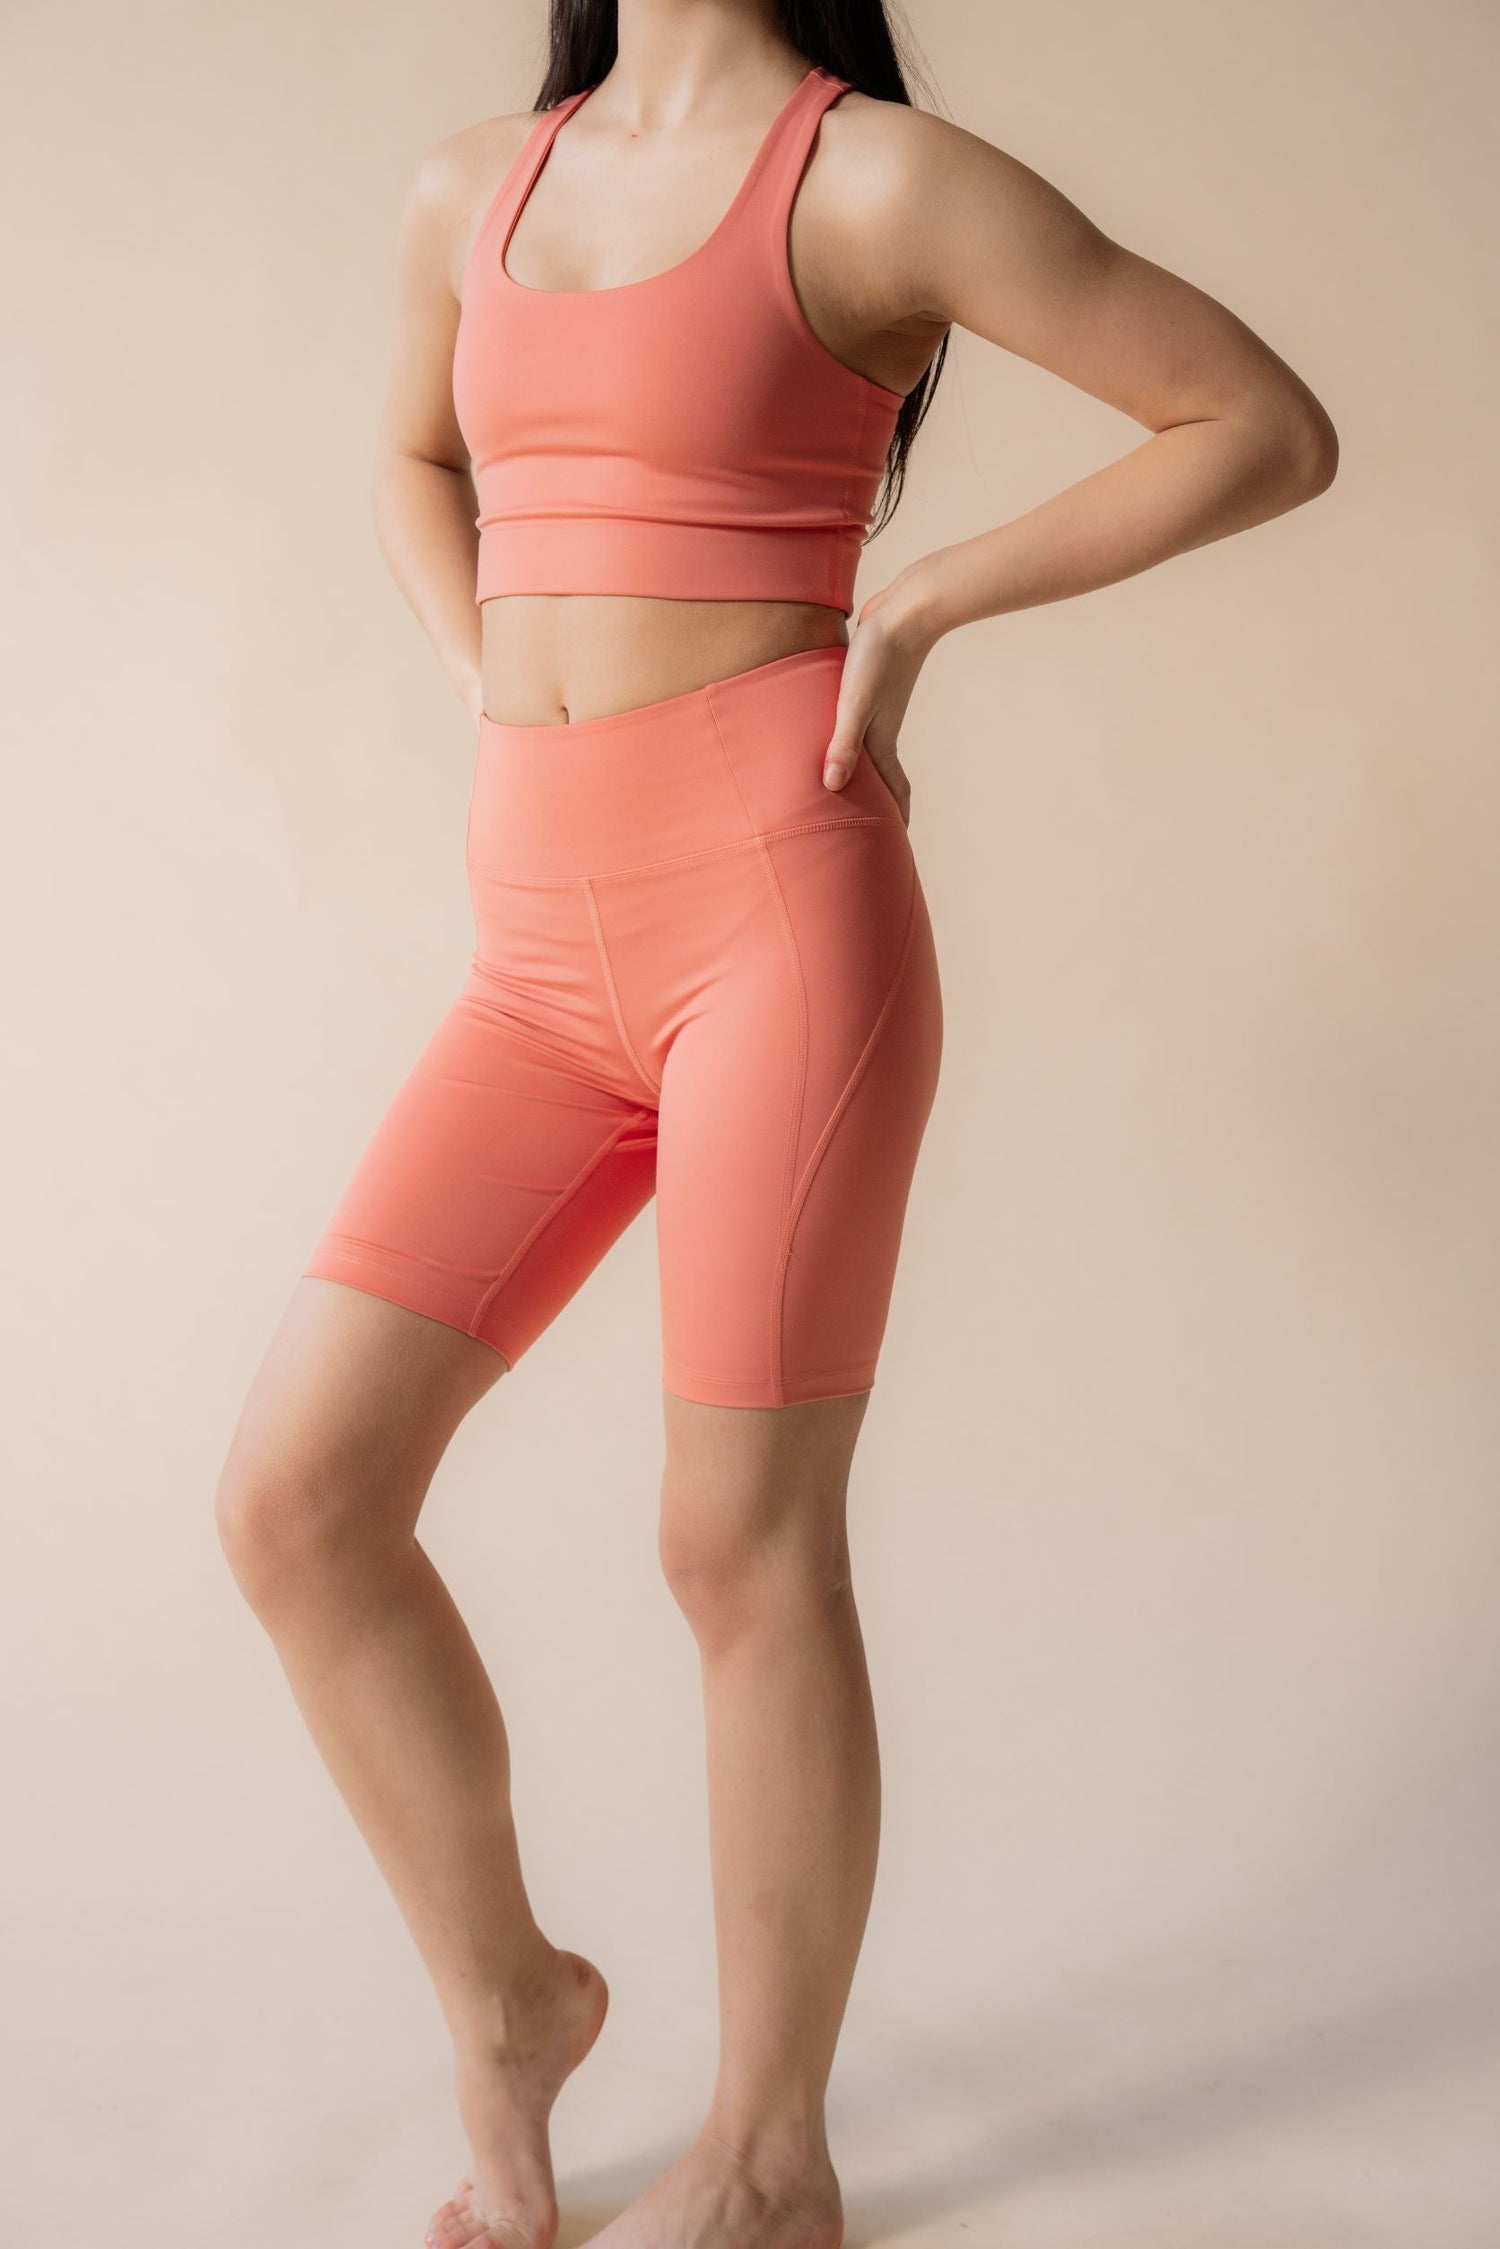 Girlfriend Collective - Bike Shorts - Made from recycled plastic bottles - Weekendbee - sustainable sportswear